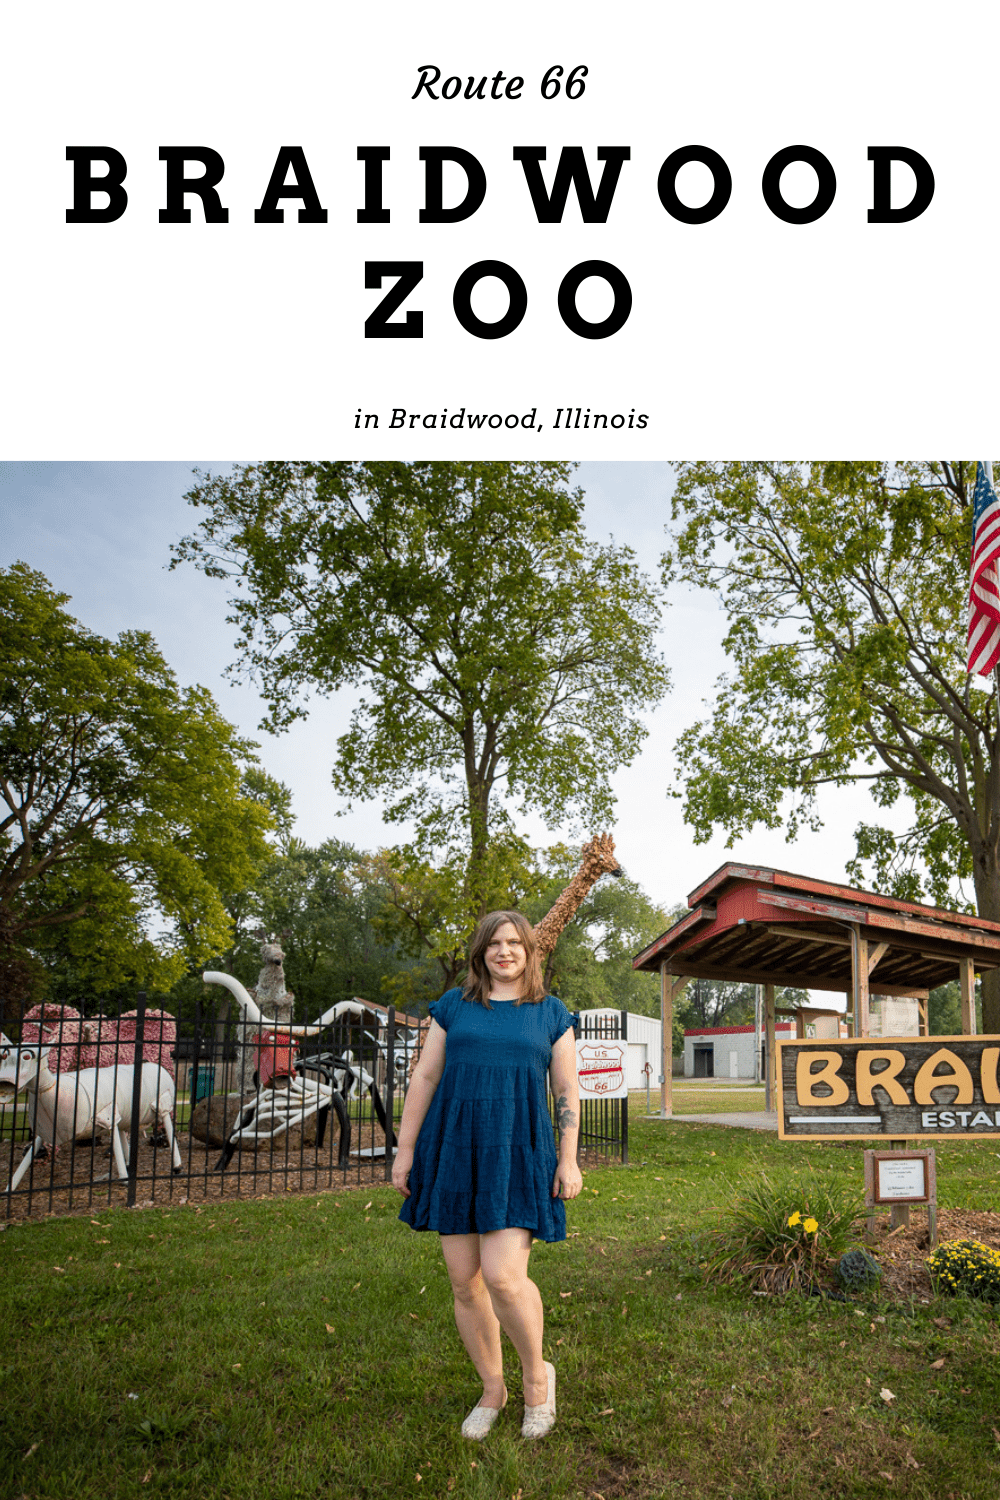 It's a zoo at this Illinois Route 66 roadside attraction! Literally…at least kind of... Visit the Braidwood Zoo in Braidwood, Illinois to find this menagerie of strange animal art.   #RoadTrips #RoadTripStop  #Route66 #Route66RoadTrip #IllinoisRoute66 #Illinois #IllinoisRoadTrip #IllinoisRoadsideAttractions #Illinois #RoadsideAttractions #RoadsideAttraction #RoadsideAmerica #RoadTrip